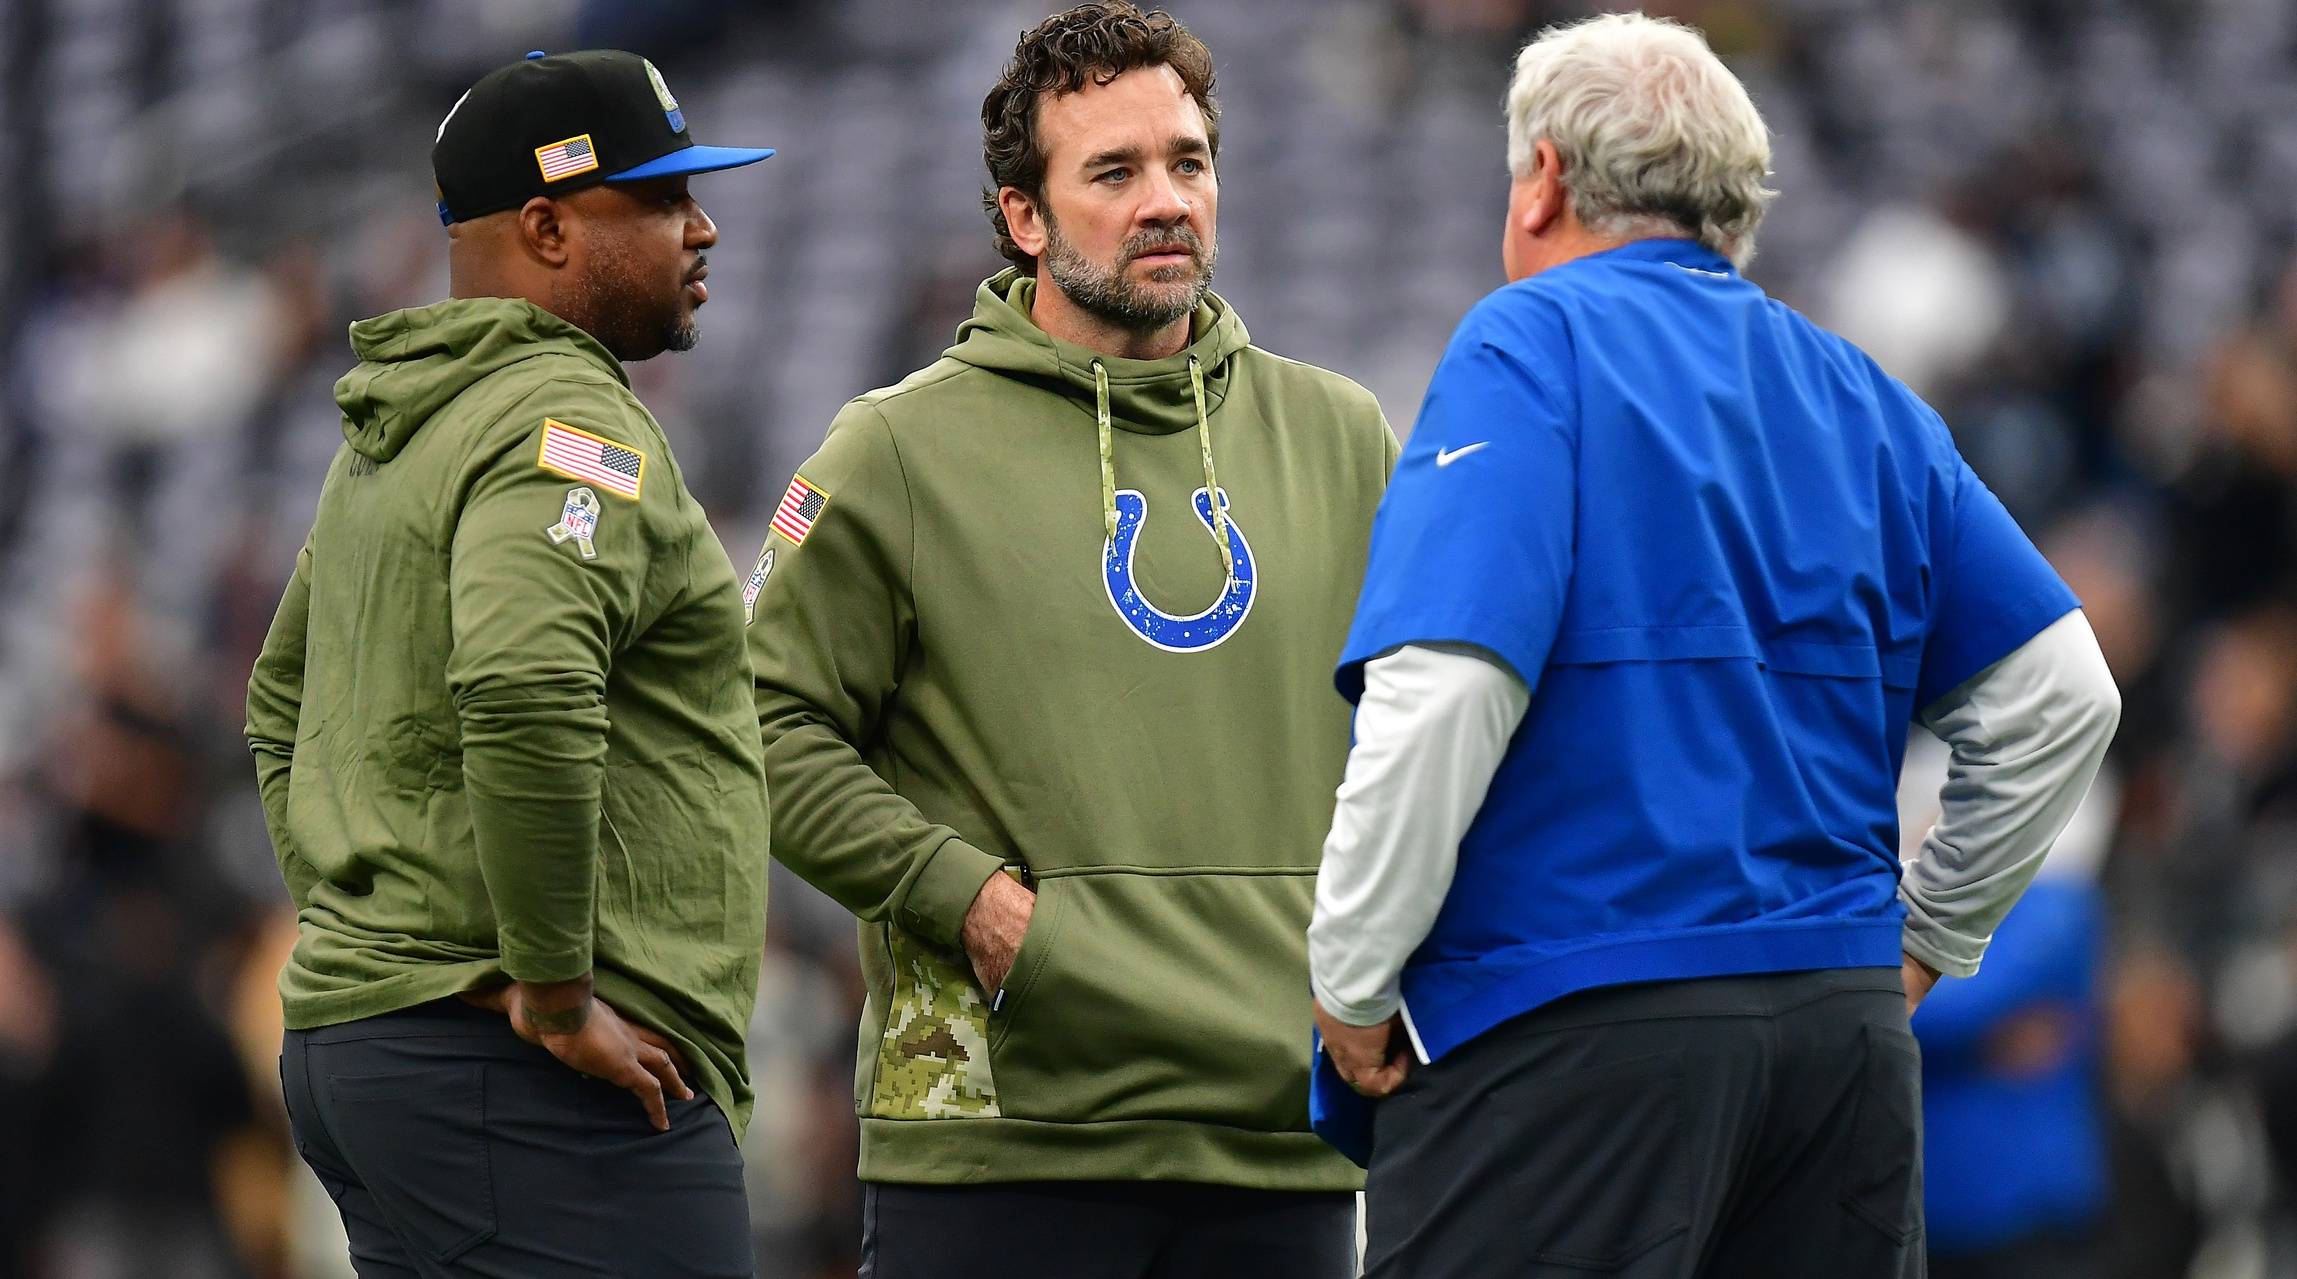 Fritz Pollard Alliance Opens Inquiry With NFL Into Colts’ Hiring of Jeff Saturday thumbnail